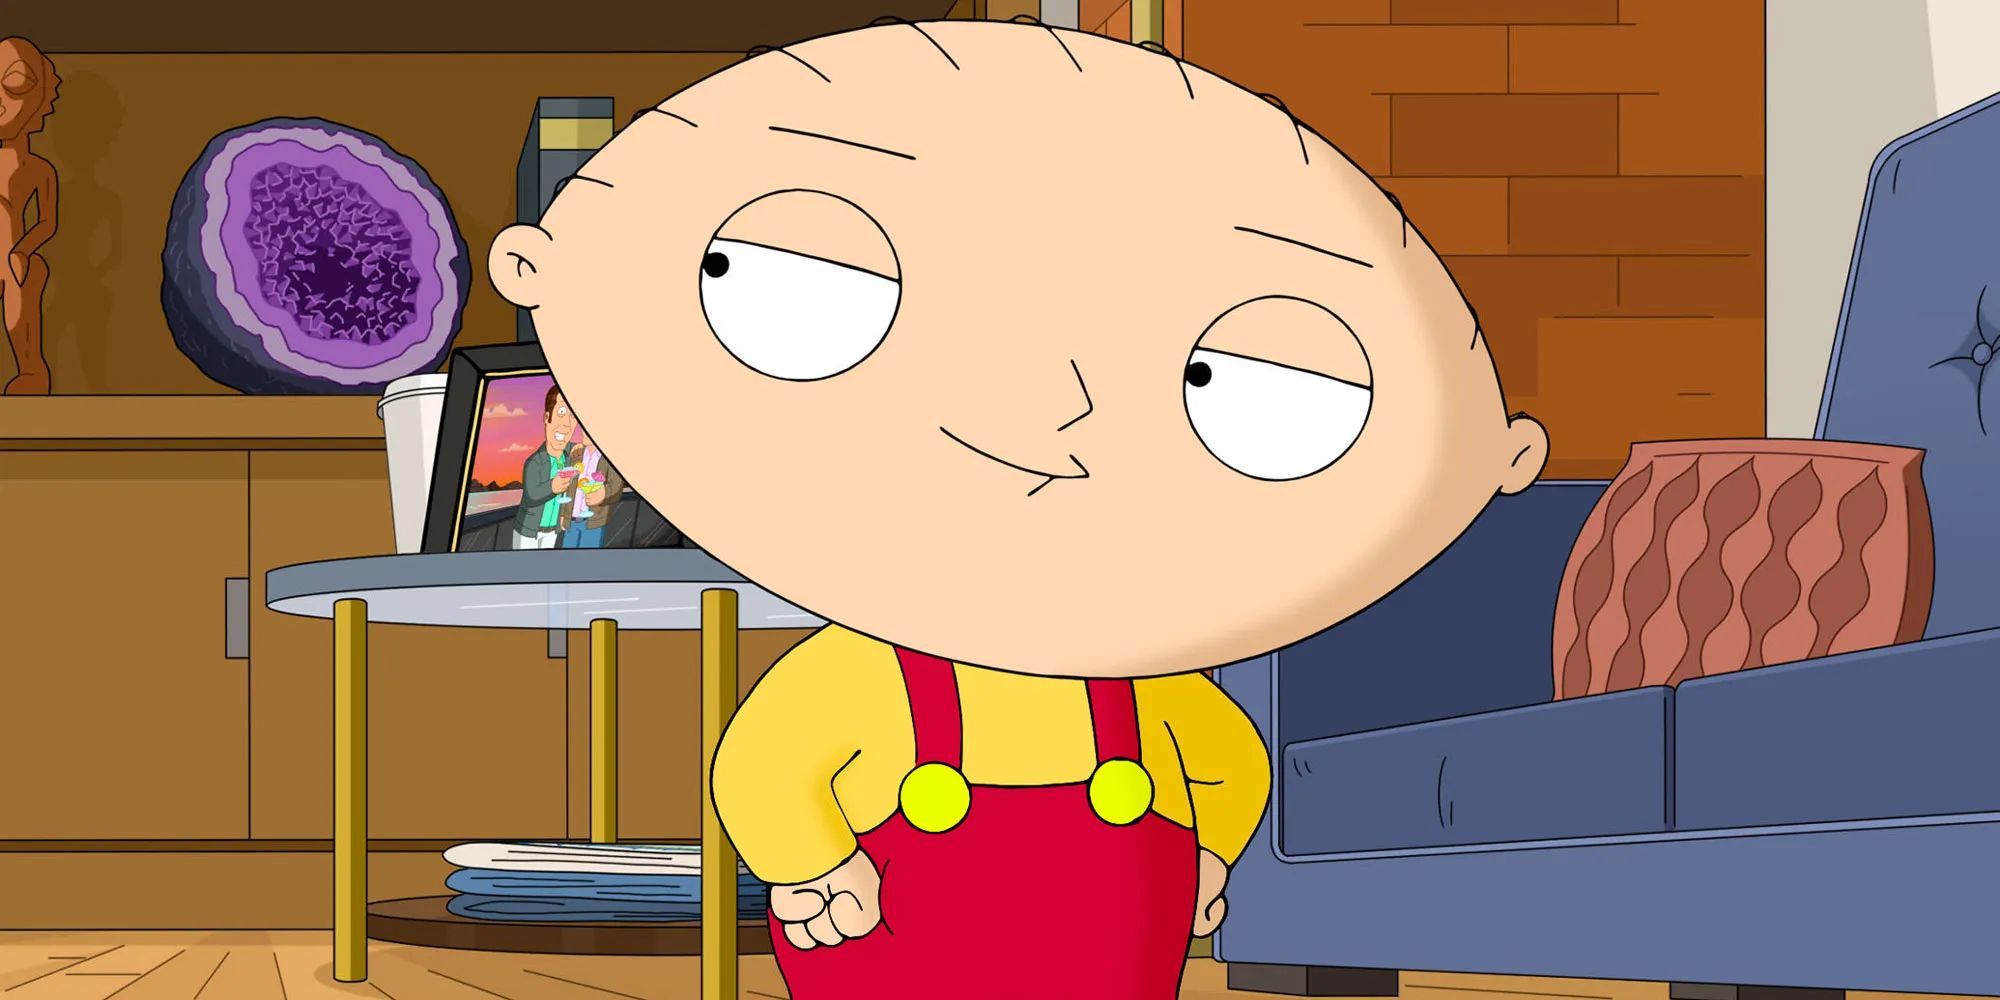 Stewie looks mischievously at a crystal on a shelf